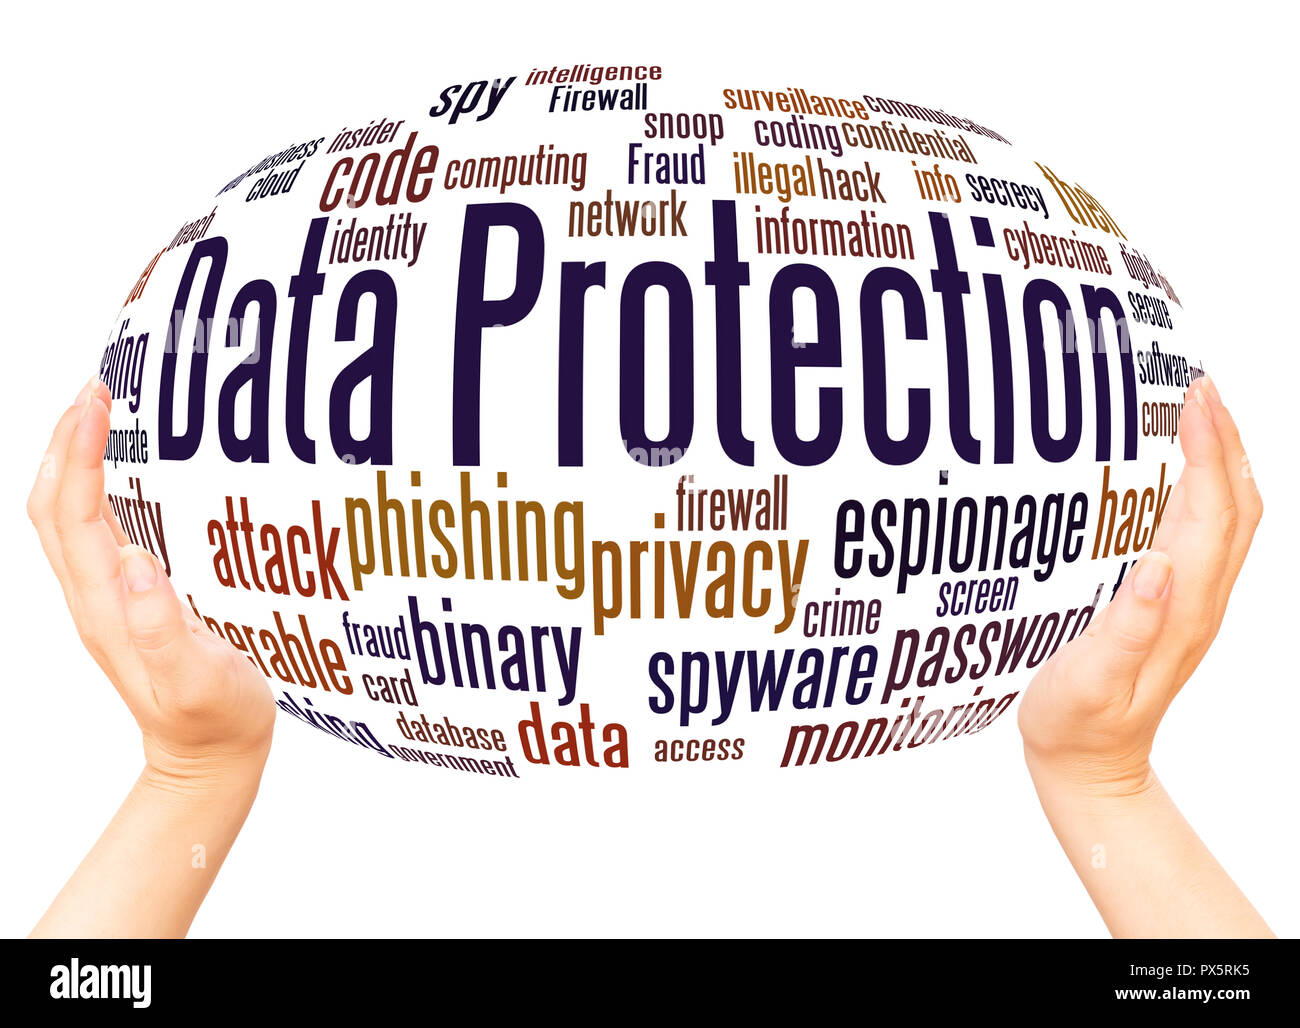 Data Protection word cloud hand sphere concept on white background. Stock Photo